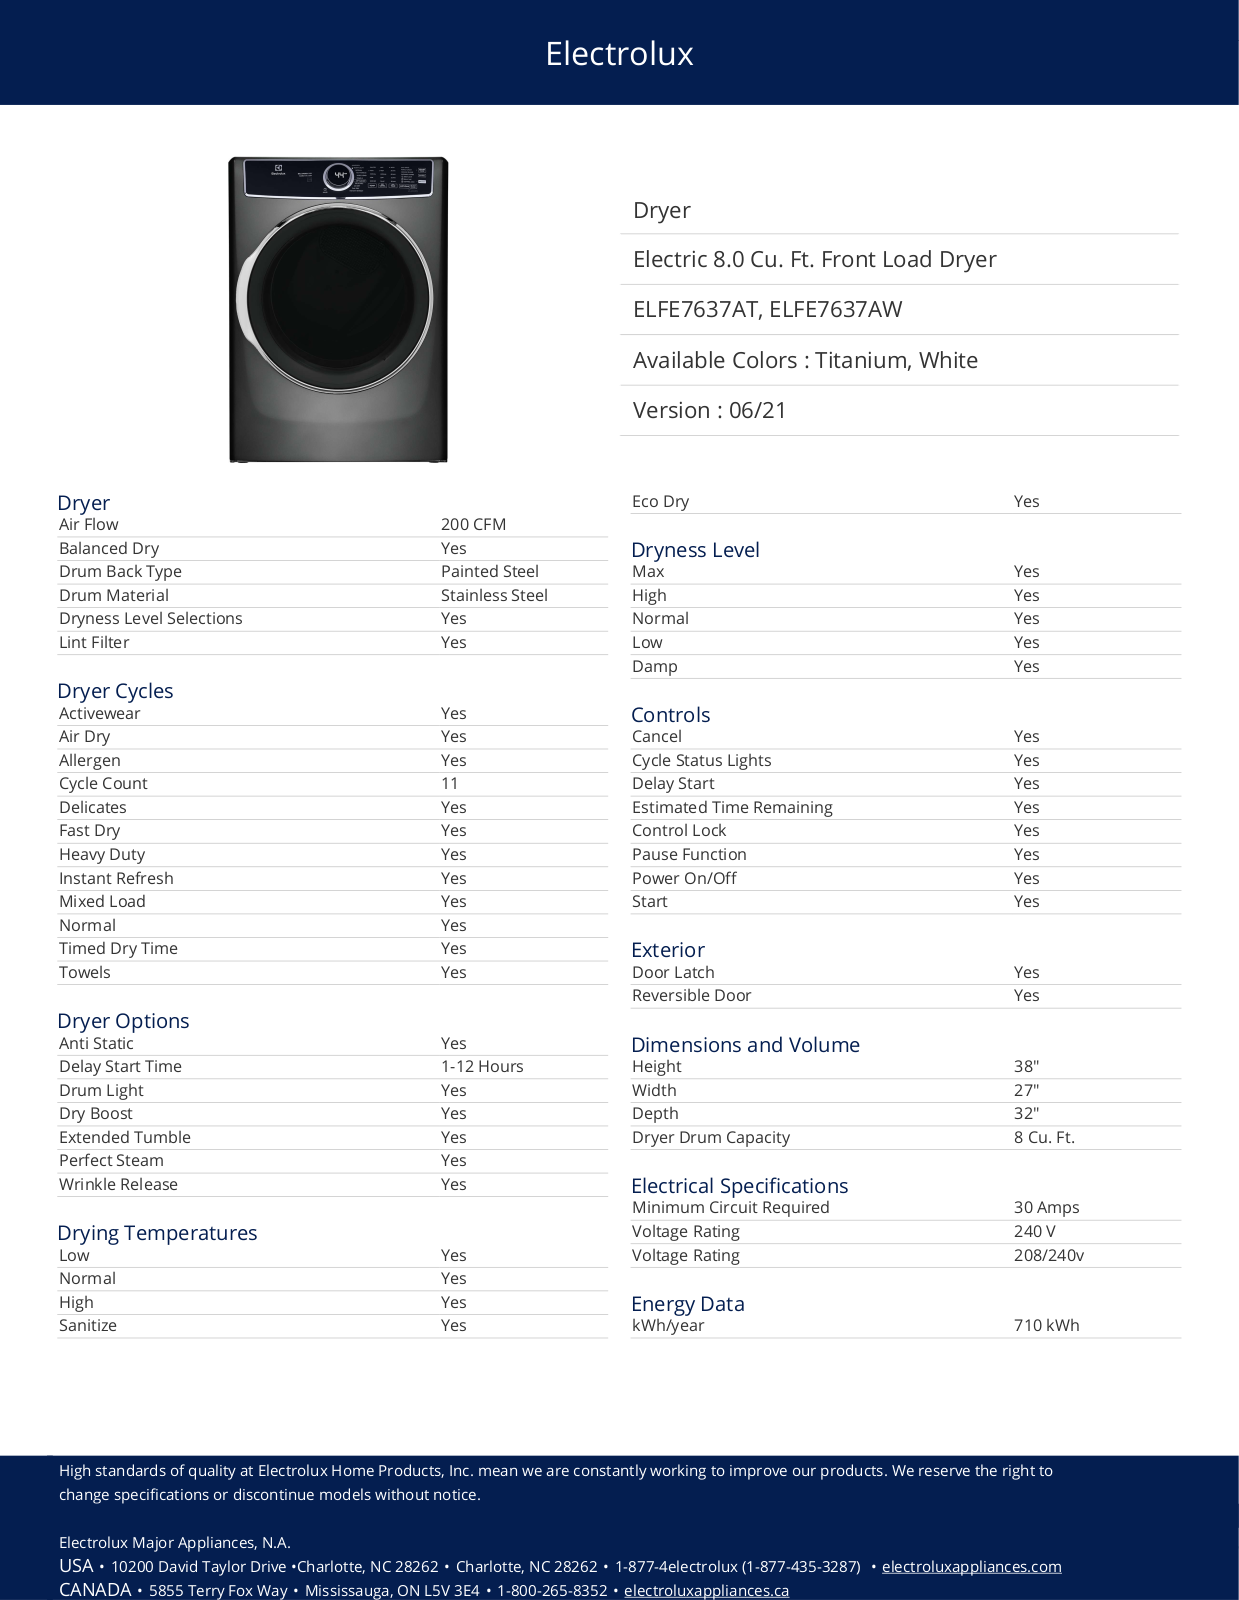 Electrolux ELFE7637AT, ELFE7637AW Specification Sheet